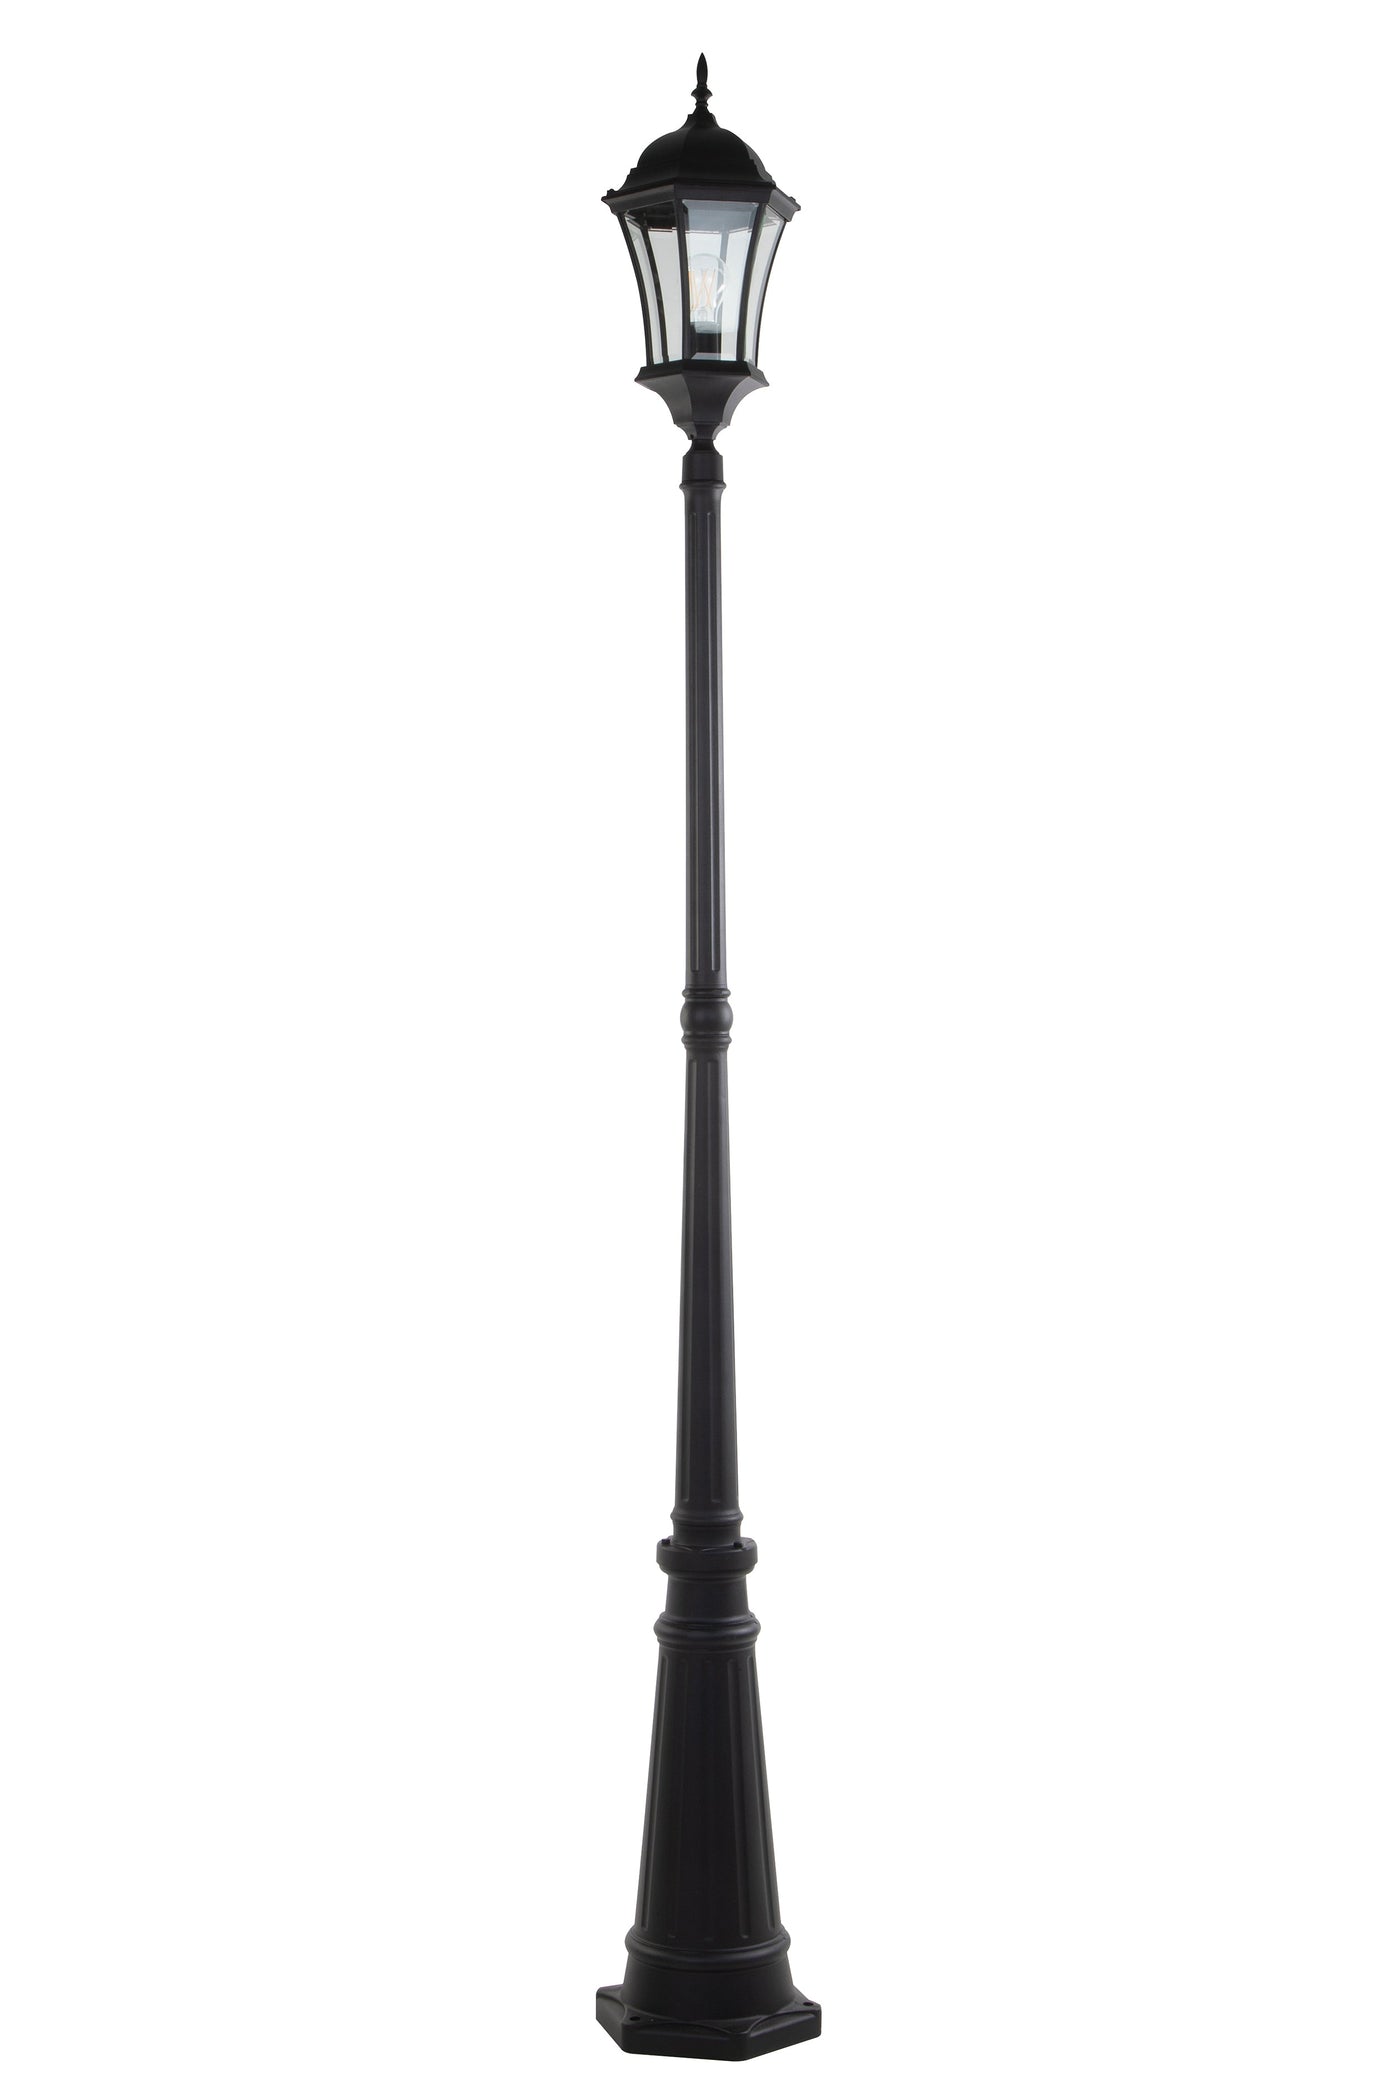 LUTEC Outside Street Light with One Head Die-Cast Aluminum LED Outdoor Hard Wired Lamp (Head & Pole)